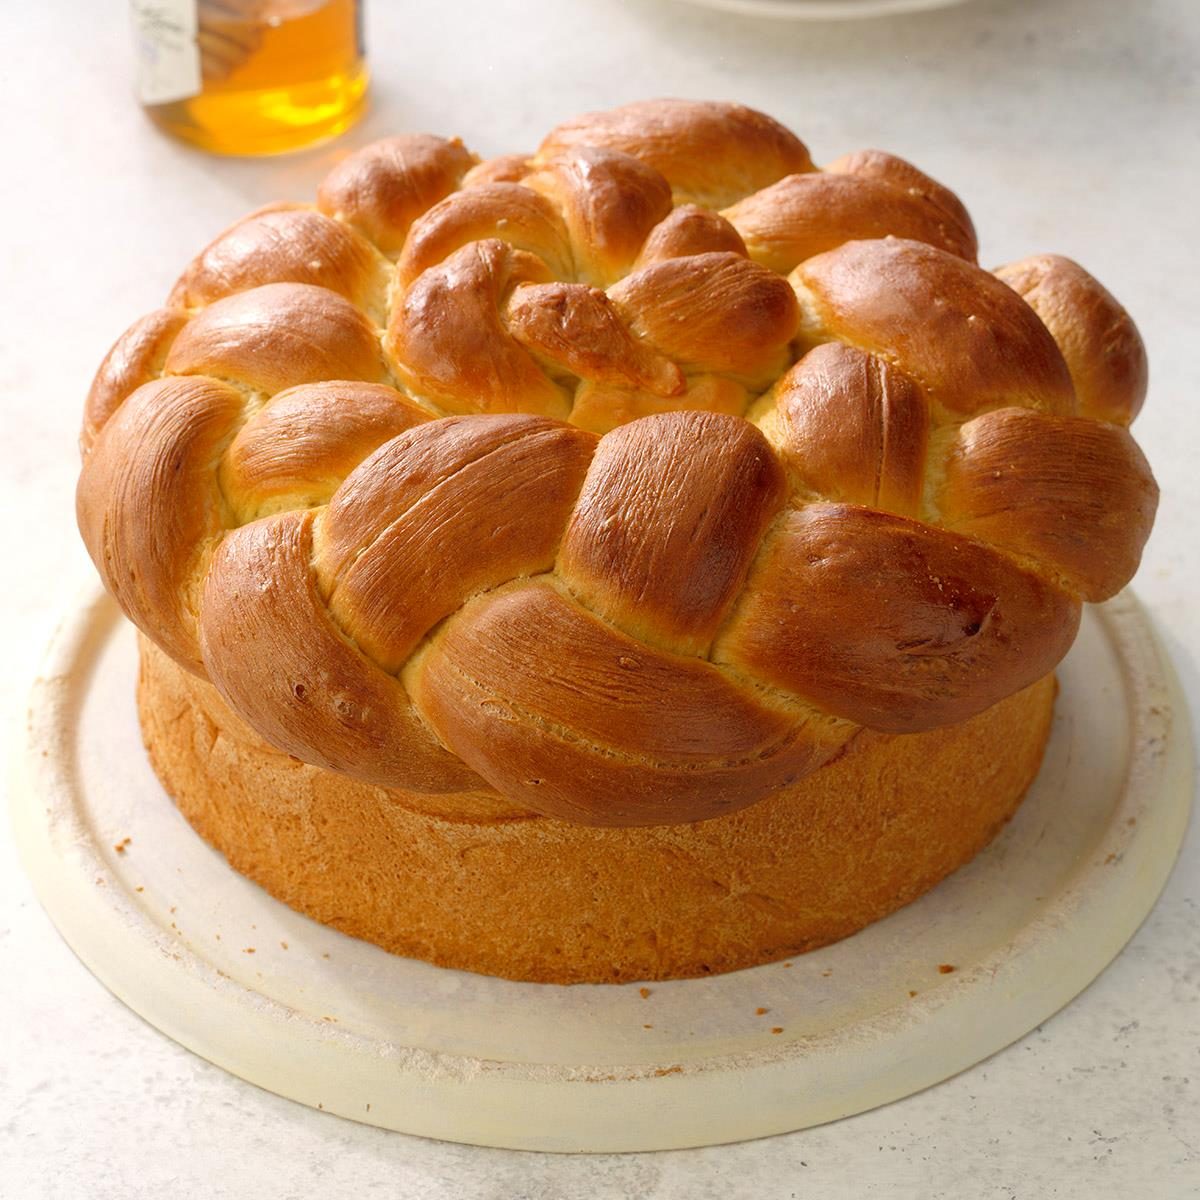 Paska Easter Bread Recipe: How to Make It